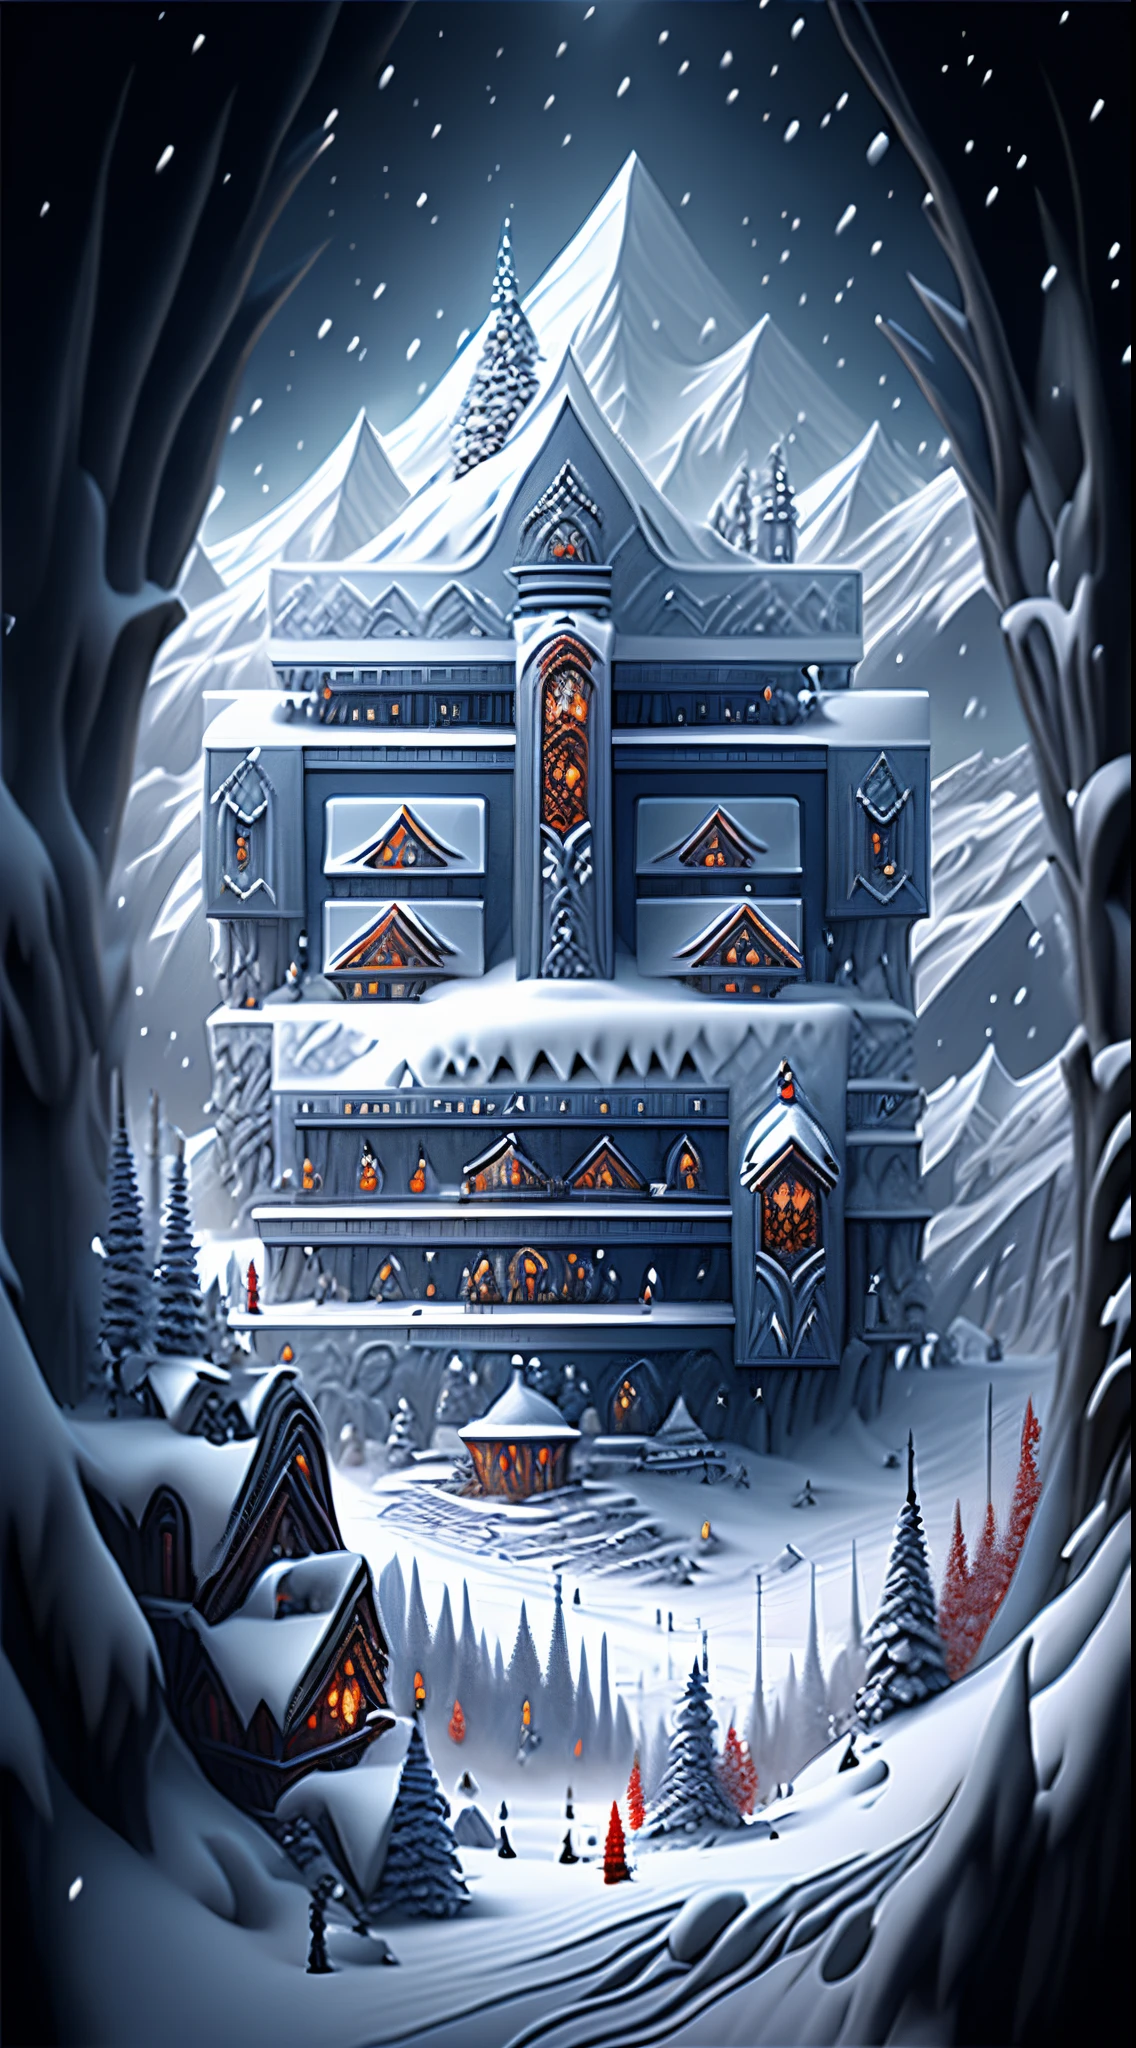 （Huge snowy mountains），（Blizzarding），Fantasyart，Surreal，,the ultra-detailed,